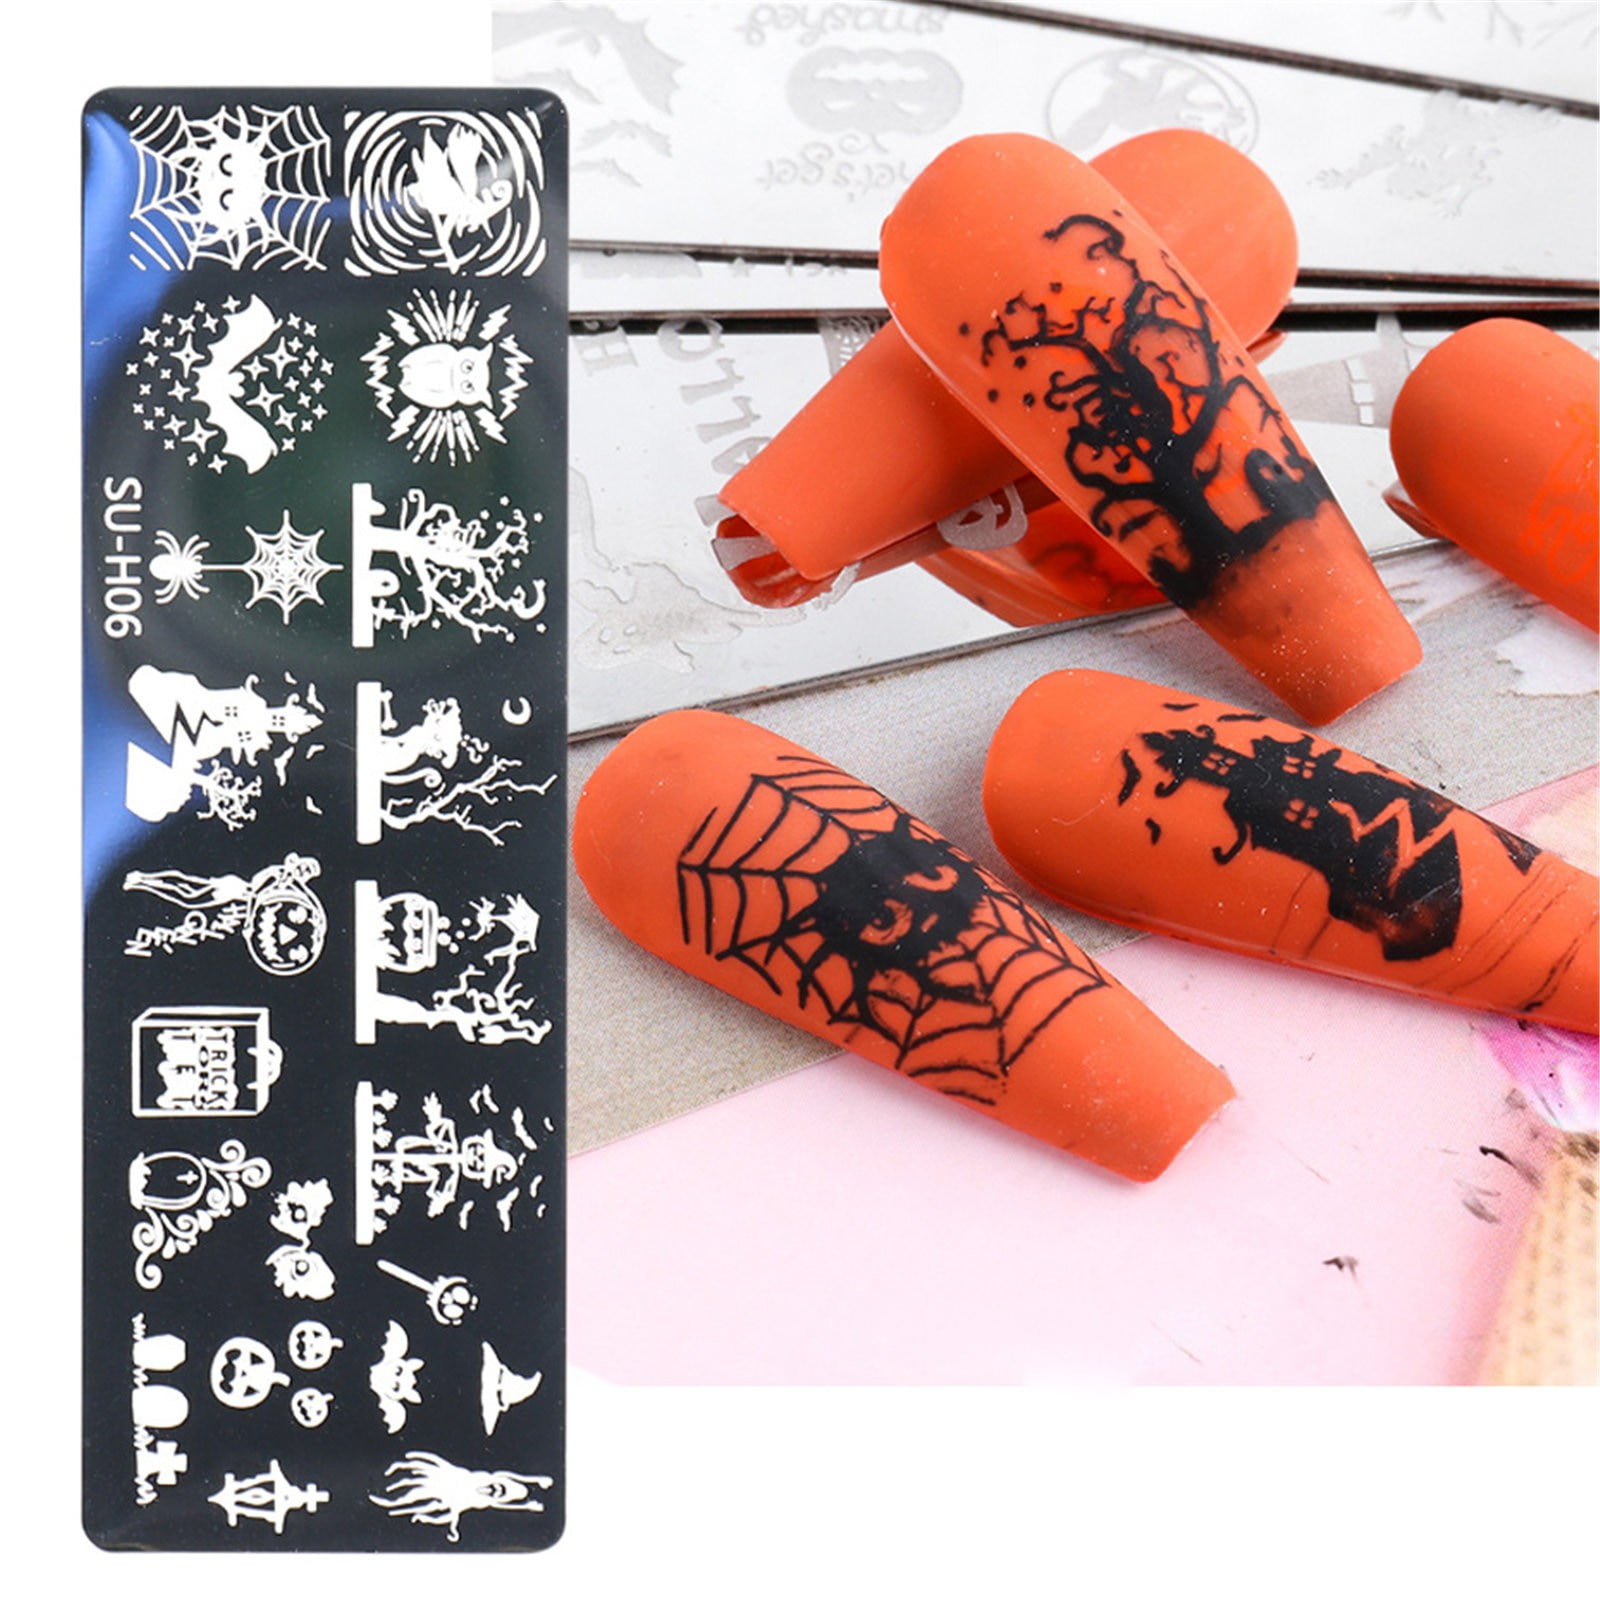 Nail Art Templates Stamping Plates Stamp Template Marble Texture Pattern  DIY Design Image Plate Manicure Printing Tools From Boyyt, $38.12 |  DHgate.Com